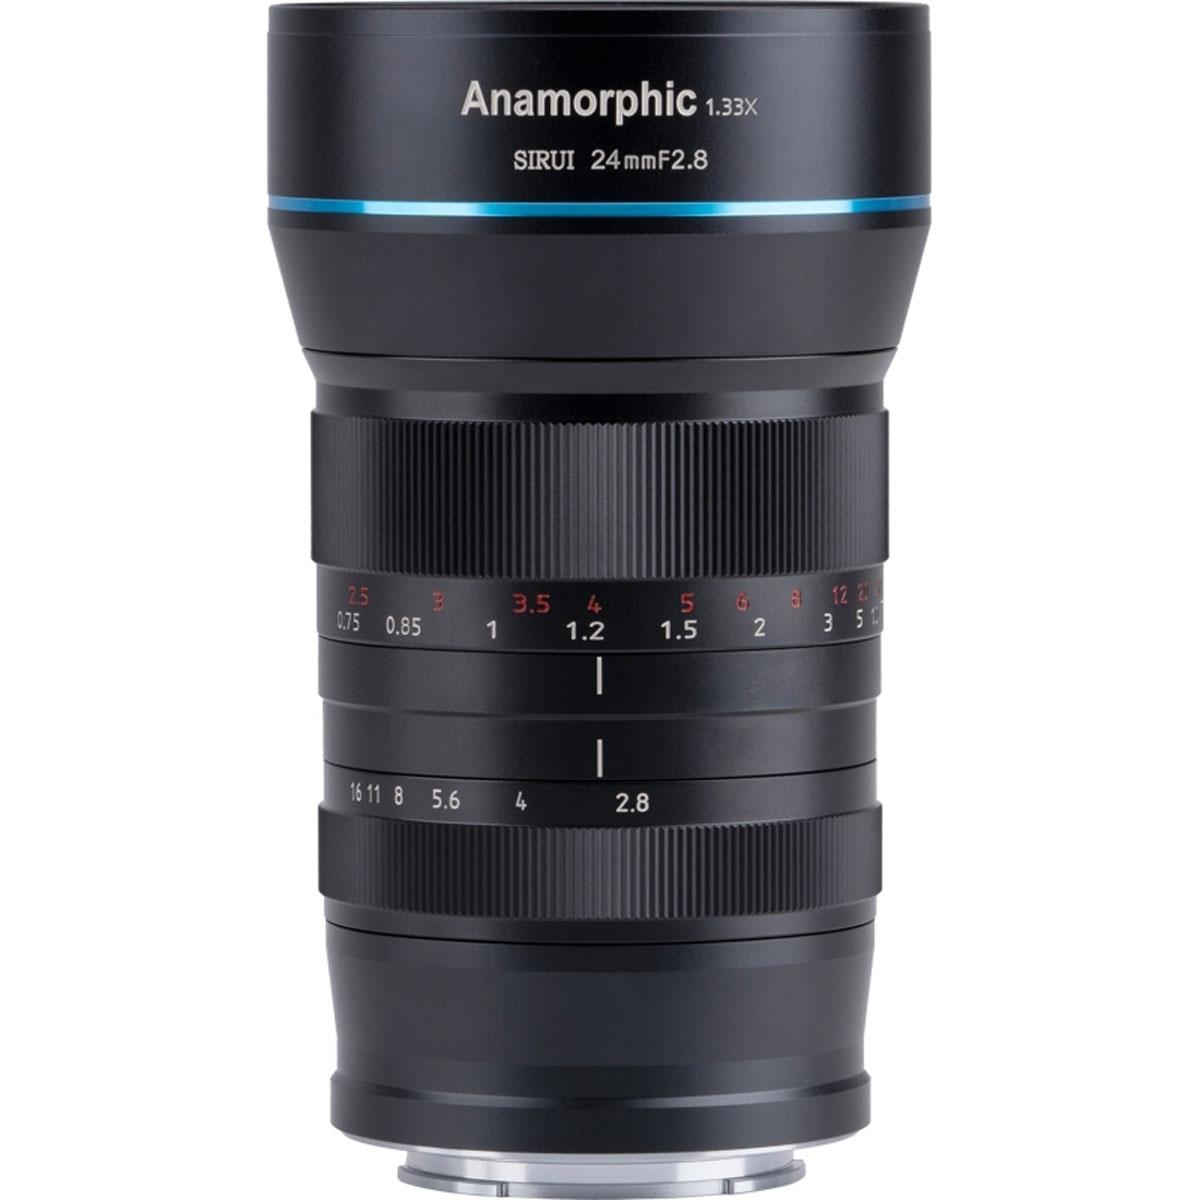 24mm Sirui f/2.8 1.33X Anamorphic Lens for Sony, Canon, Nikon, & More $699 + free s/h